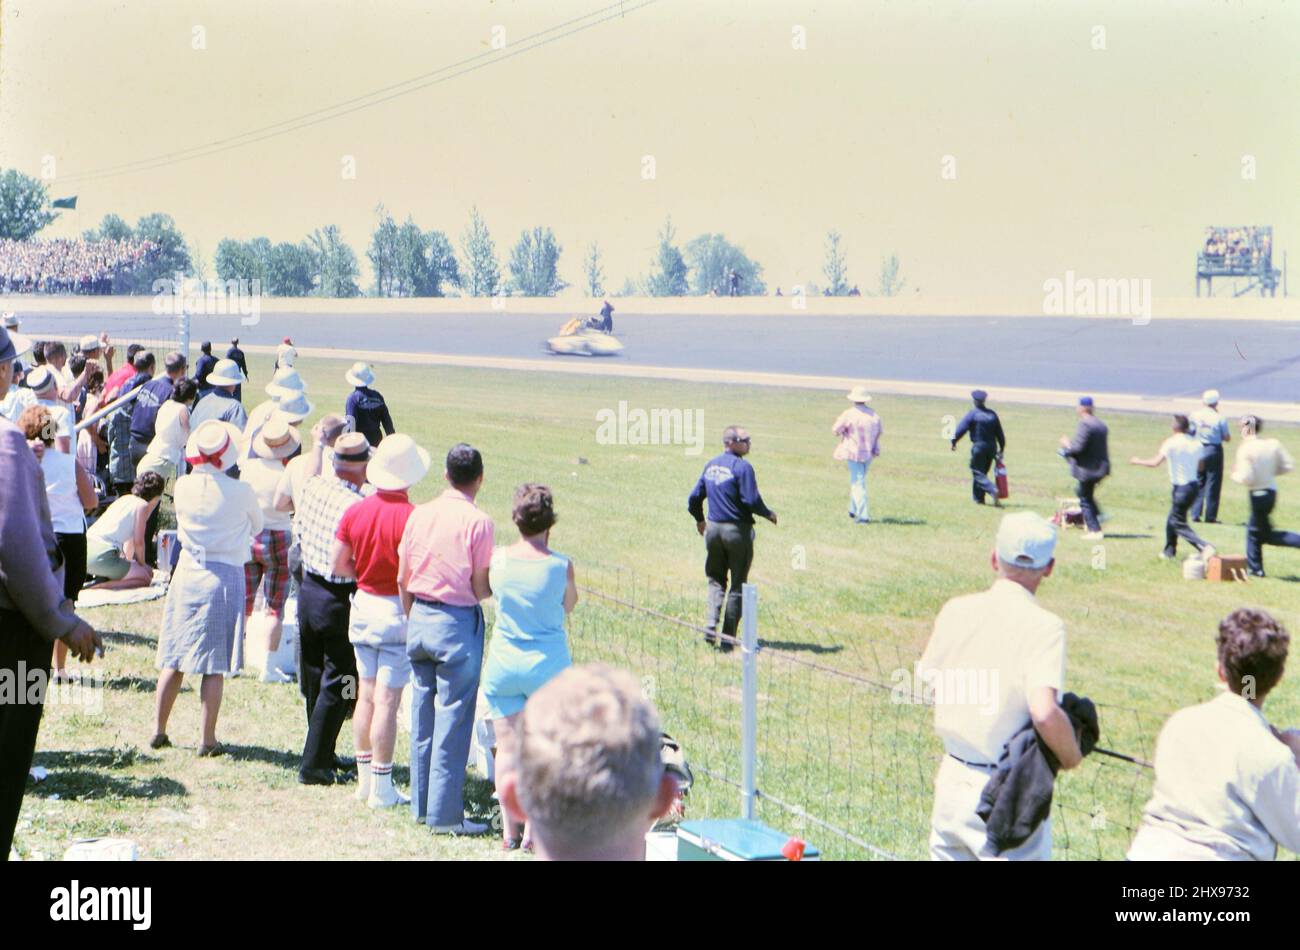 A race car crast seen at the 1963 Indianapolis 500 race from the race track infield ca. 1963 Stock Photo